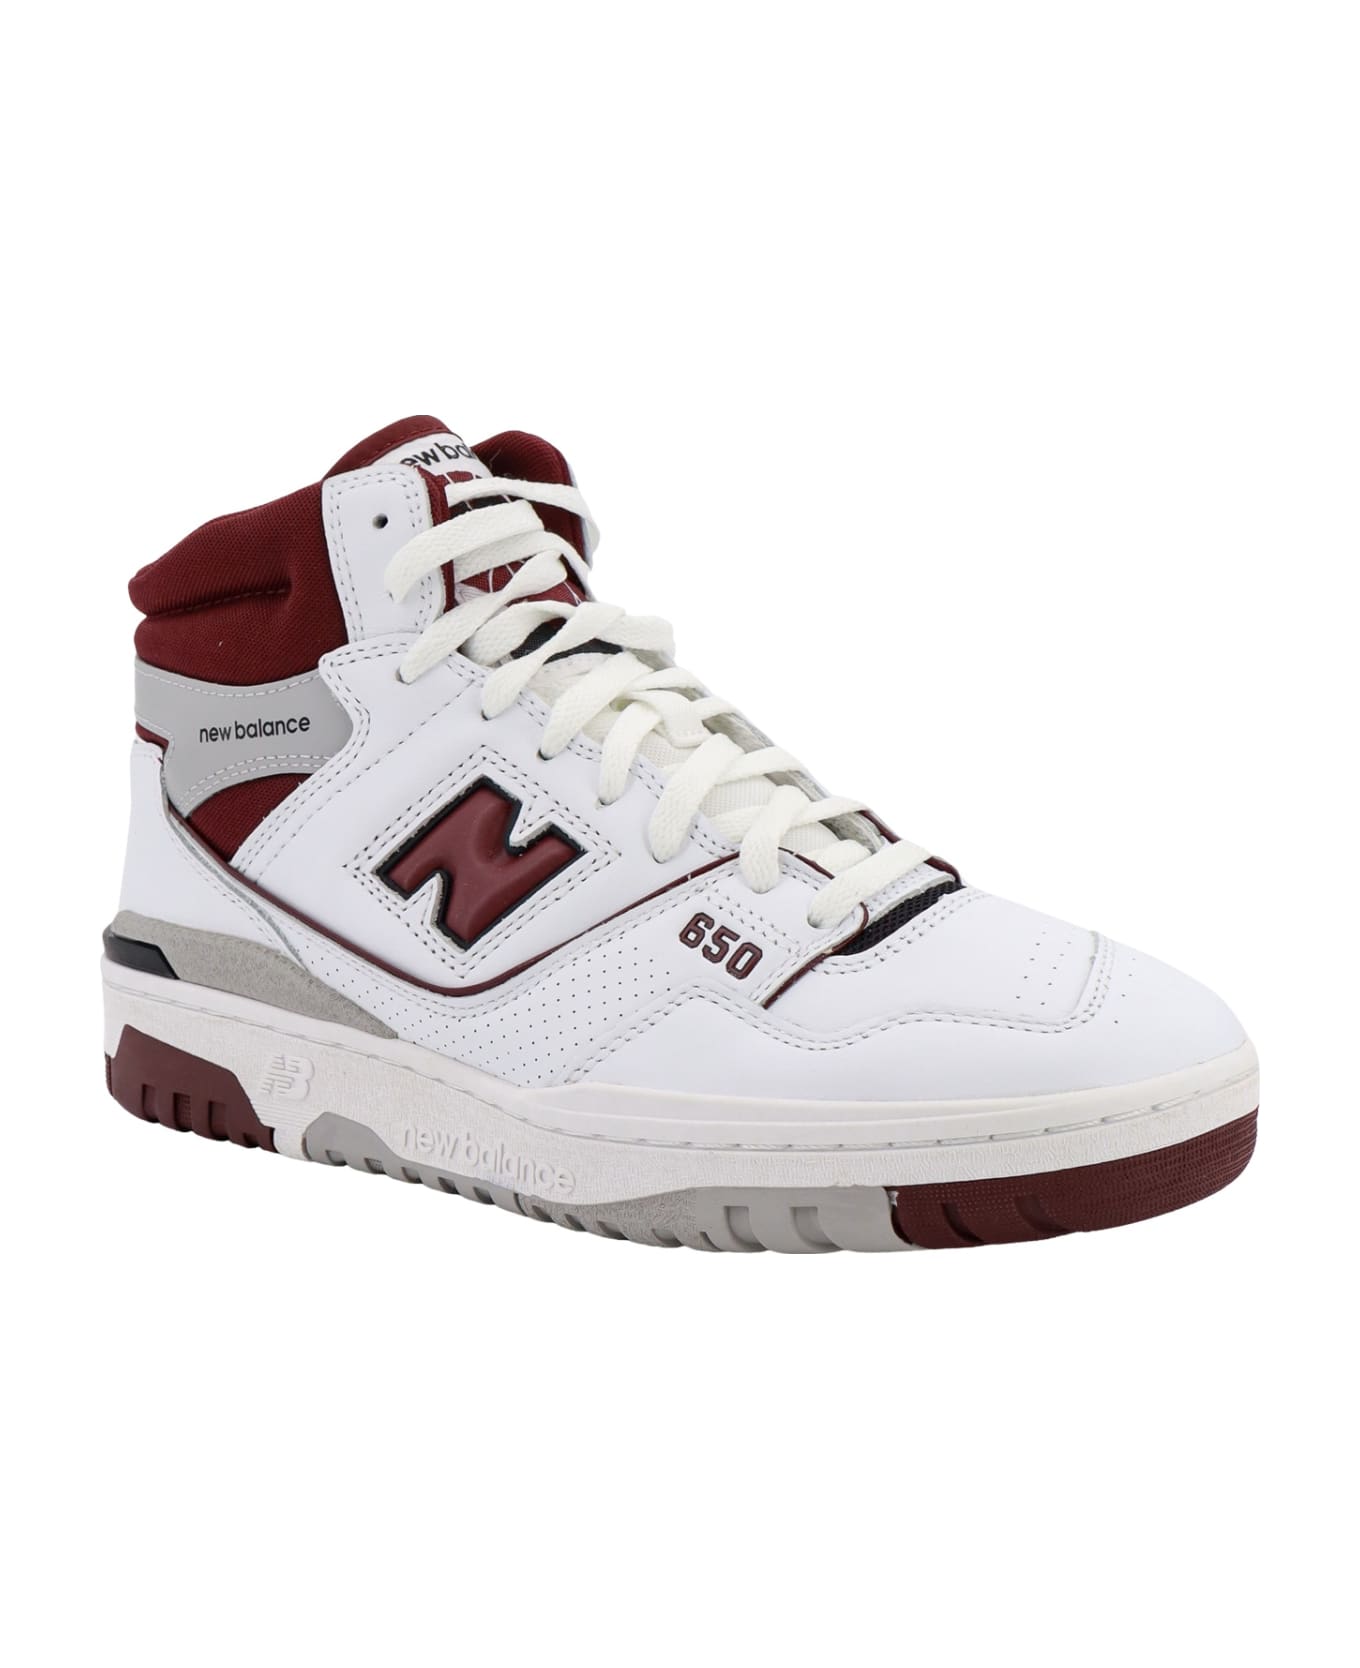 New Balance 650 Sneakers - White